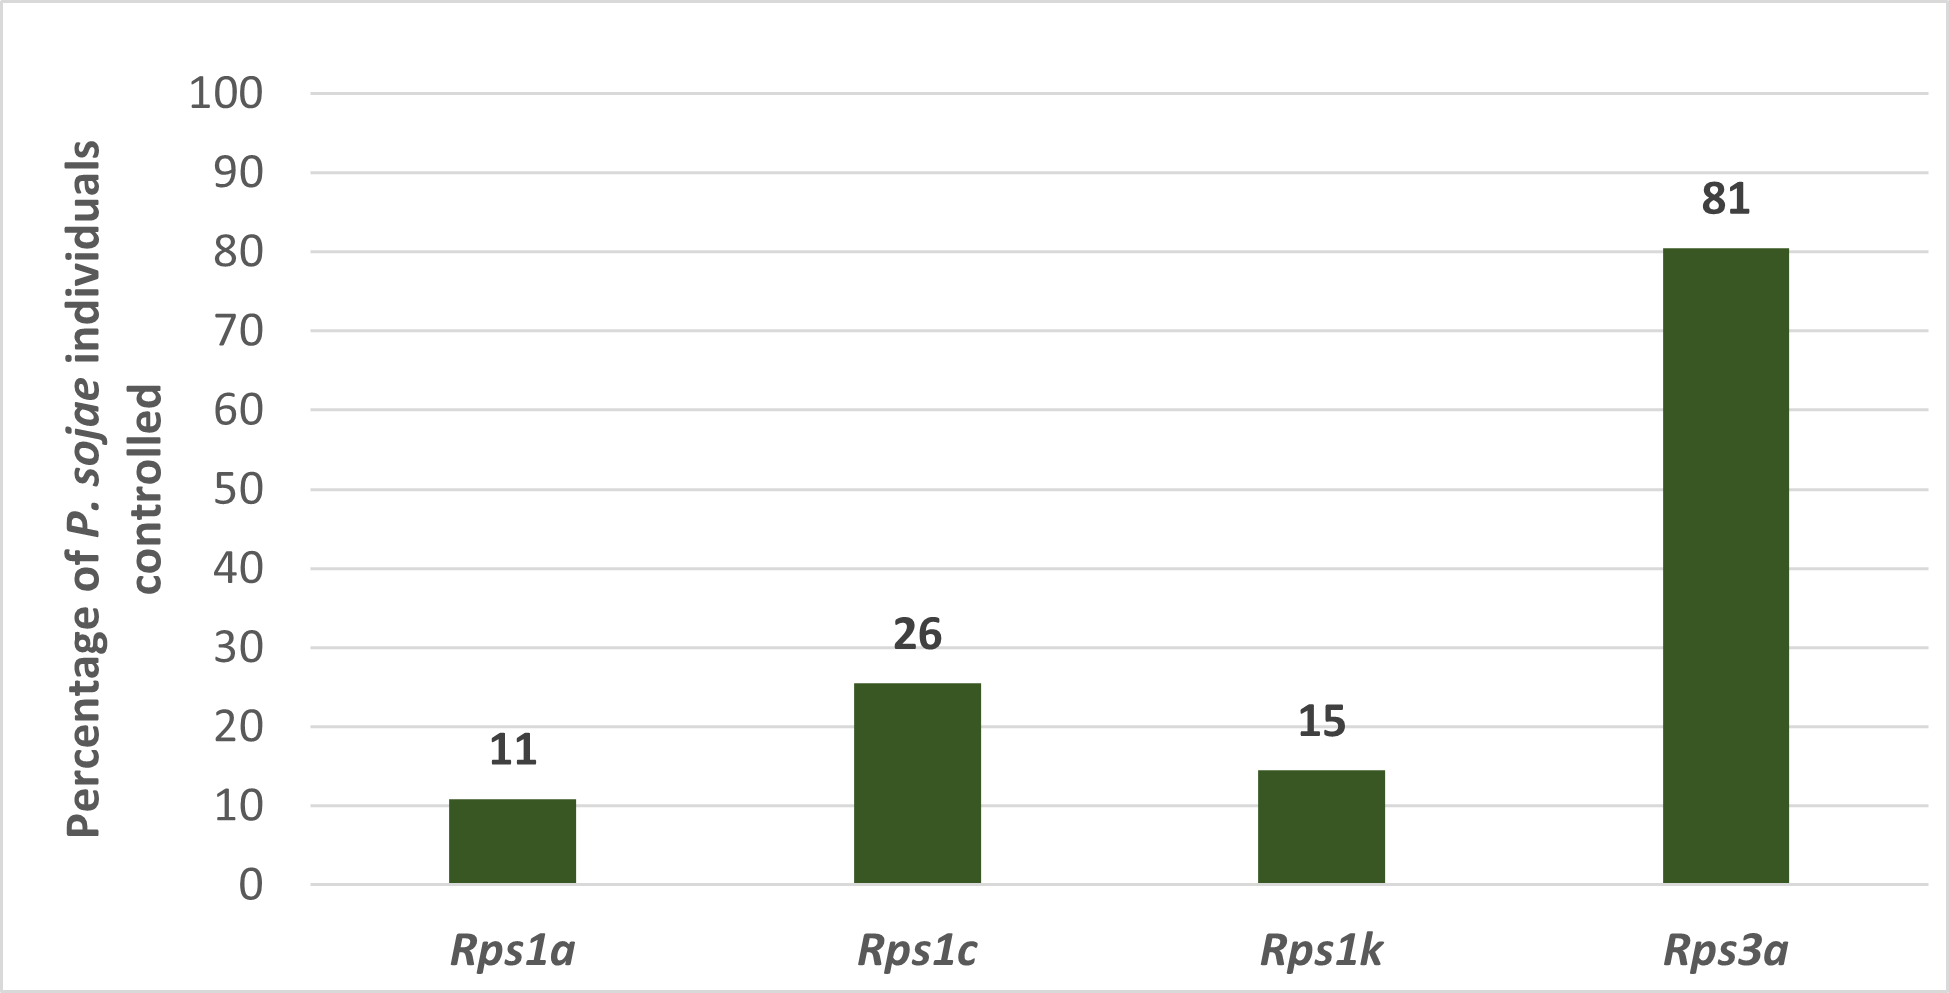 Percentage of Phytophthora sojae individuals controlled by Rps genes in the United States.